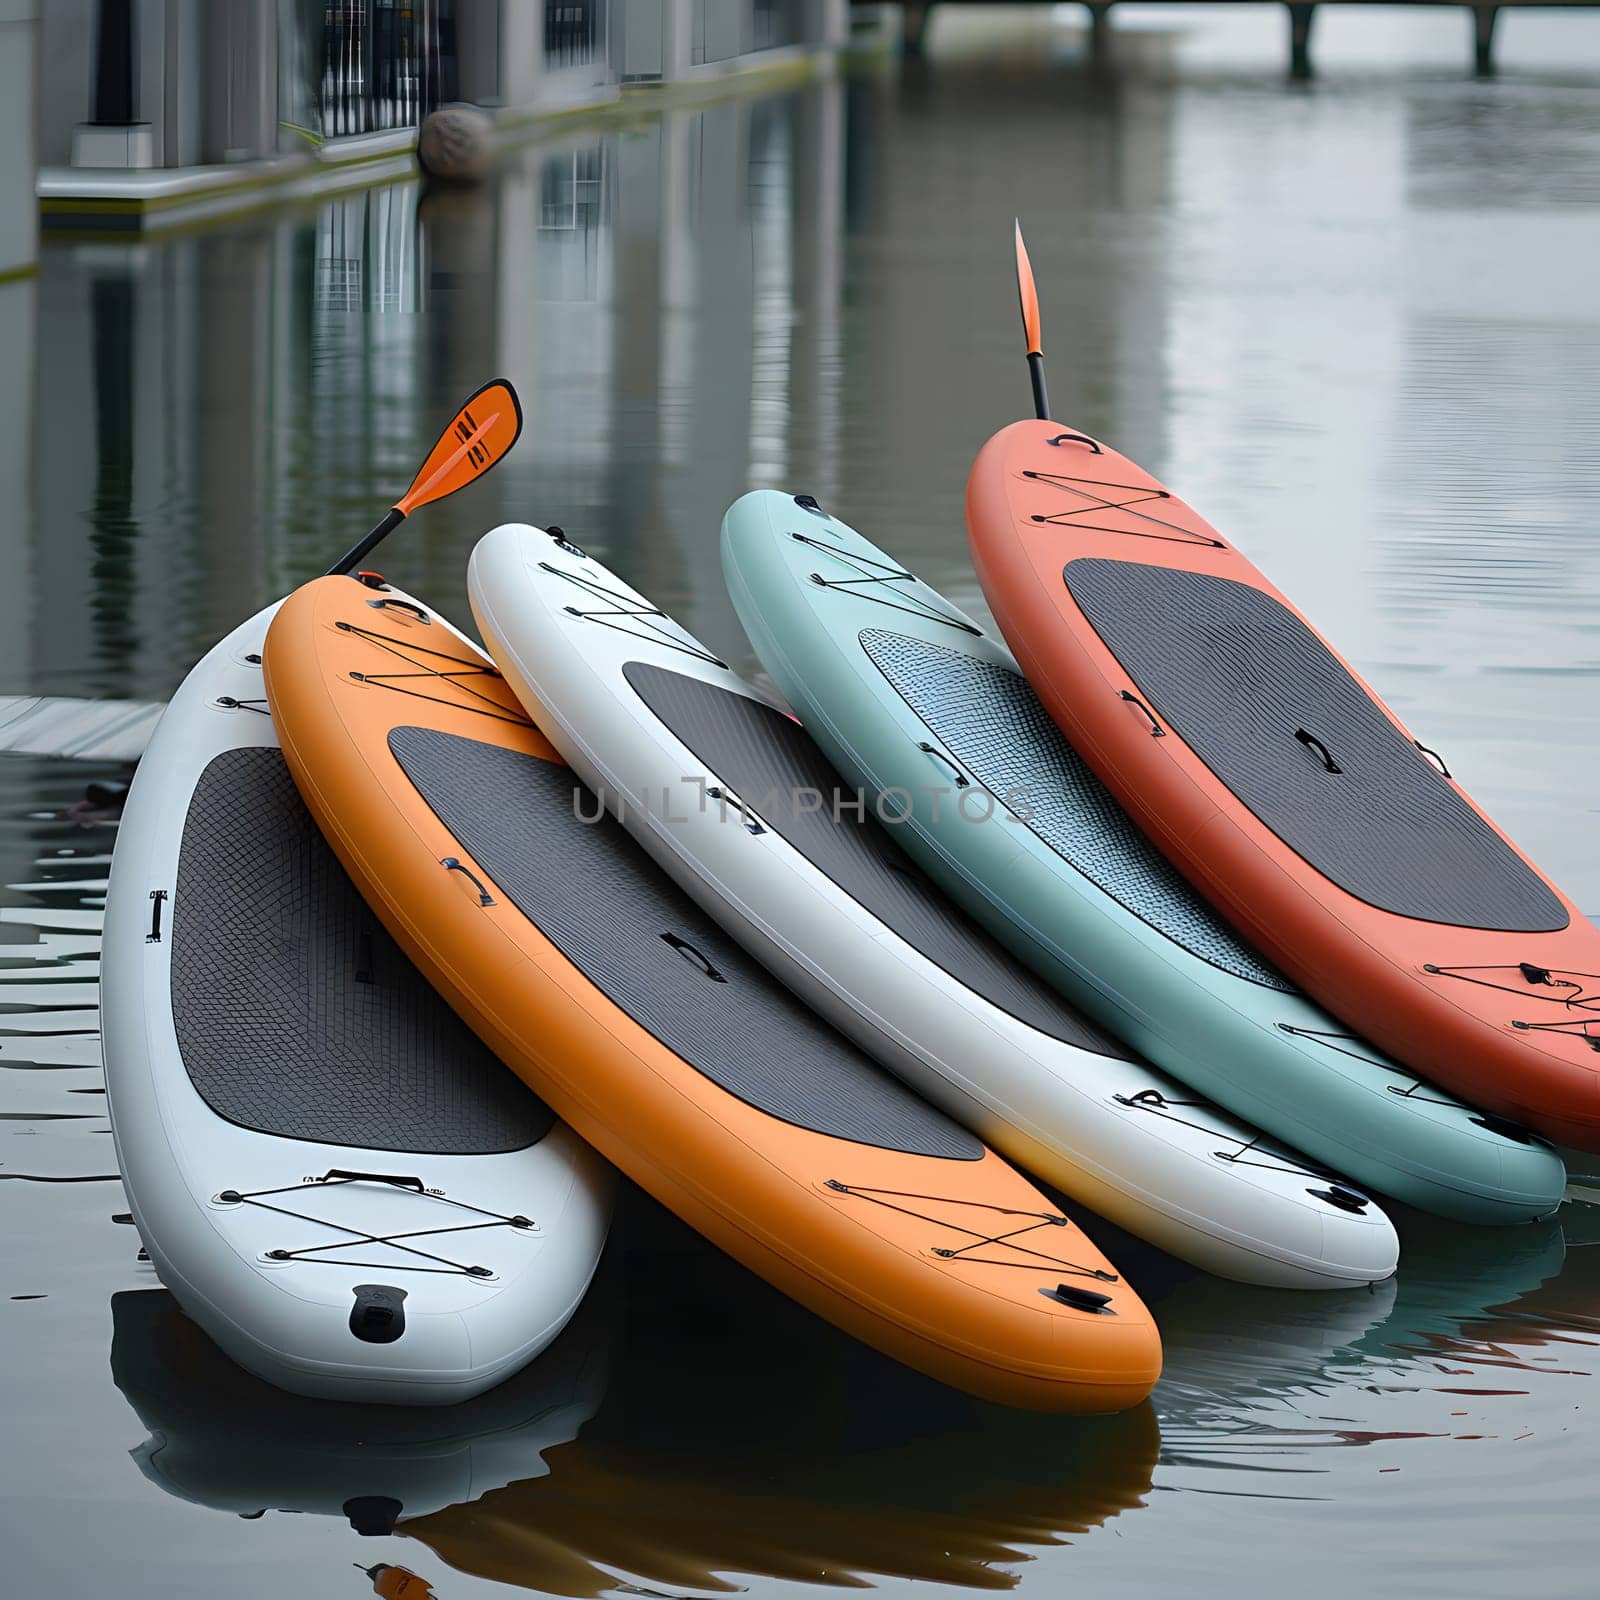 A row of paddle boards are lined up in the lake, ready for a day of recreation on the water. Each board comes equipped with a paddle and lifejacket for safety